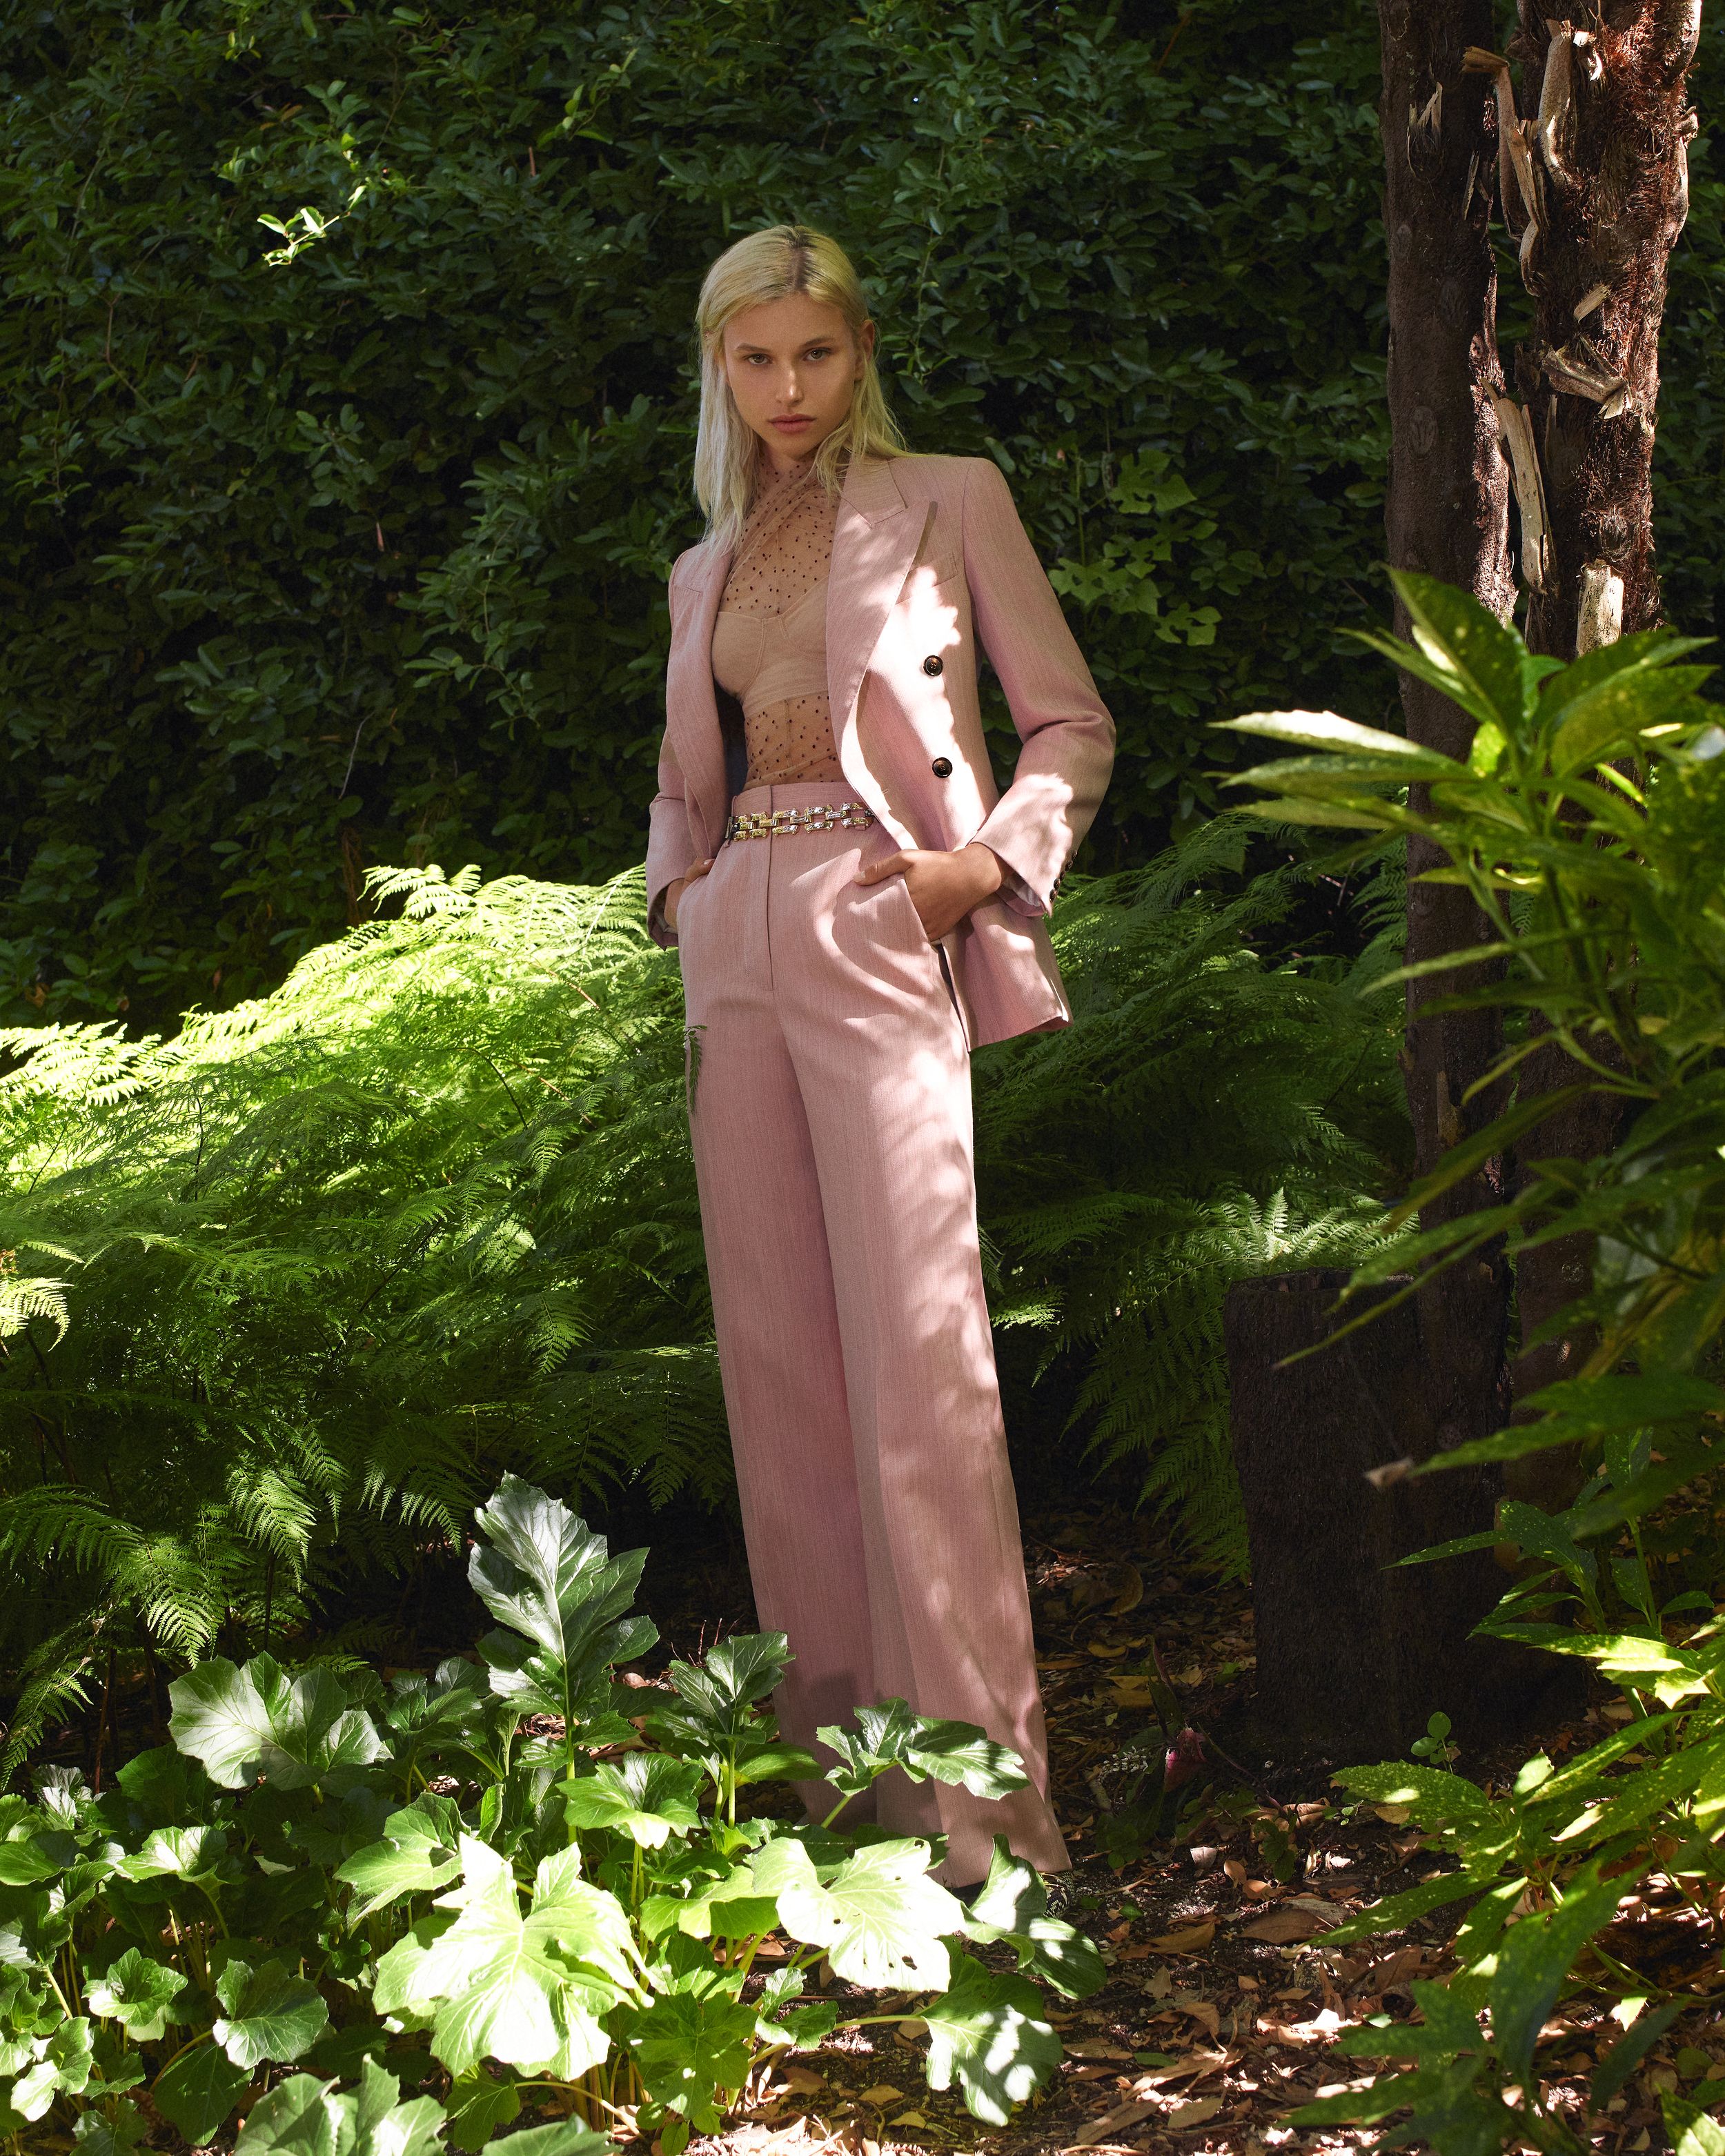 Model standing in front of dense greenery wearing a pink suit jacket and trousers